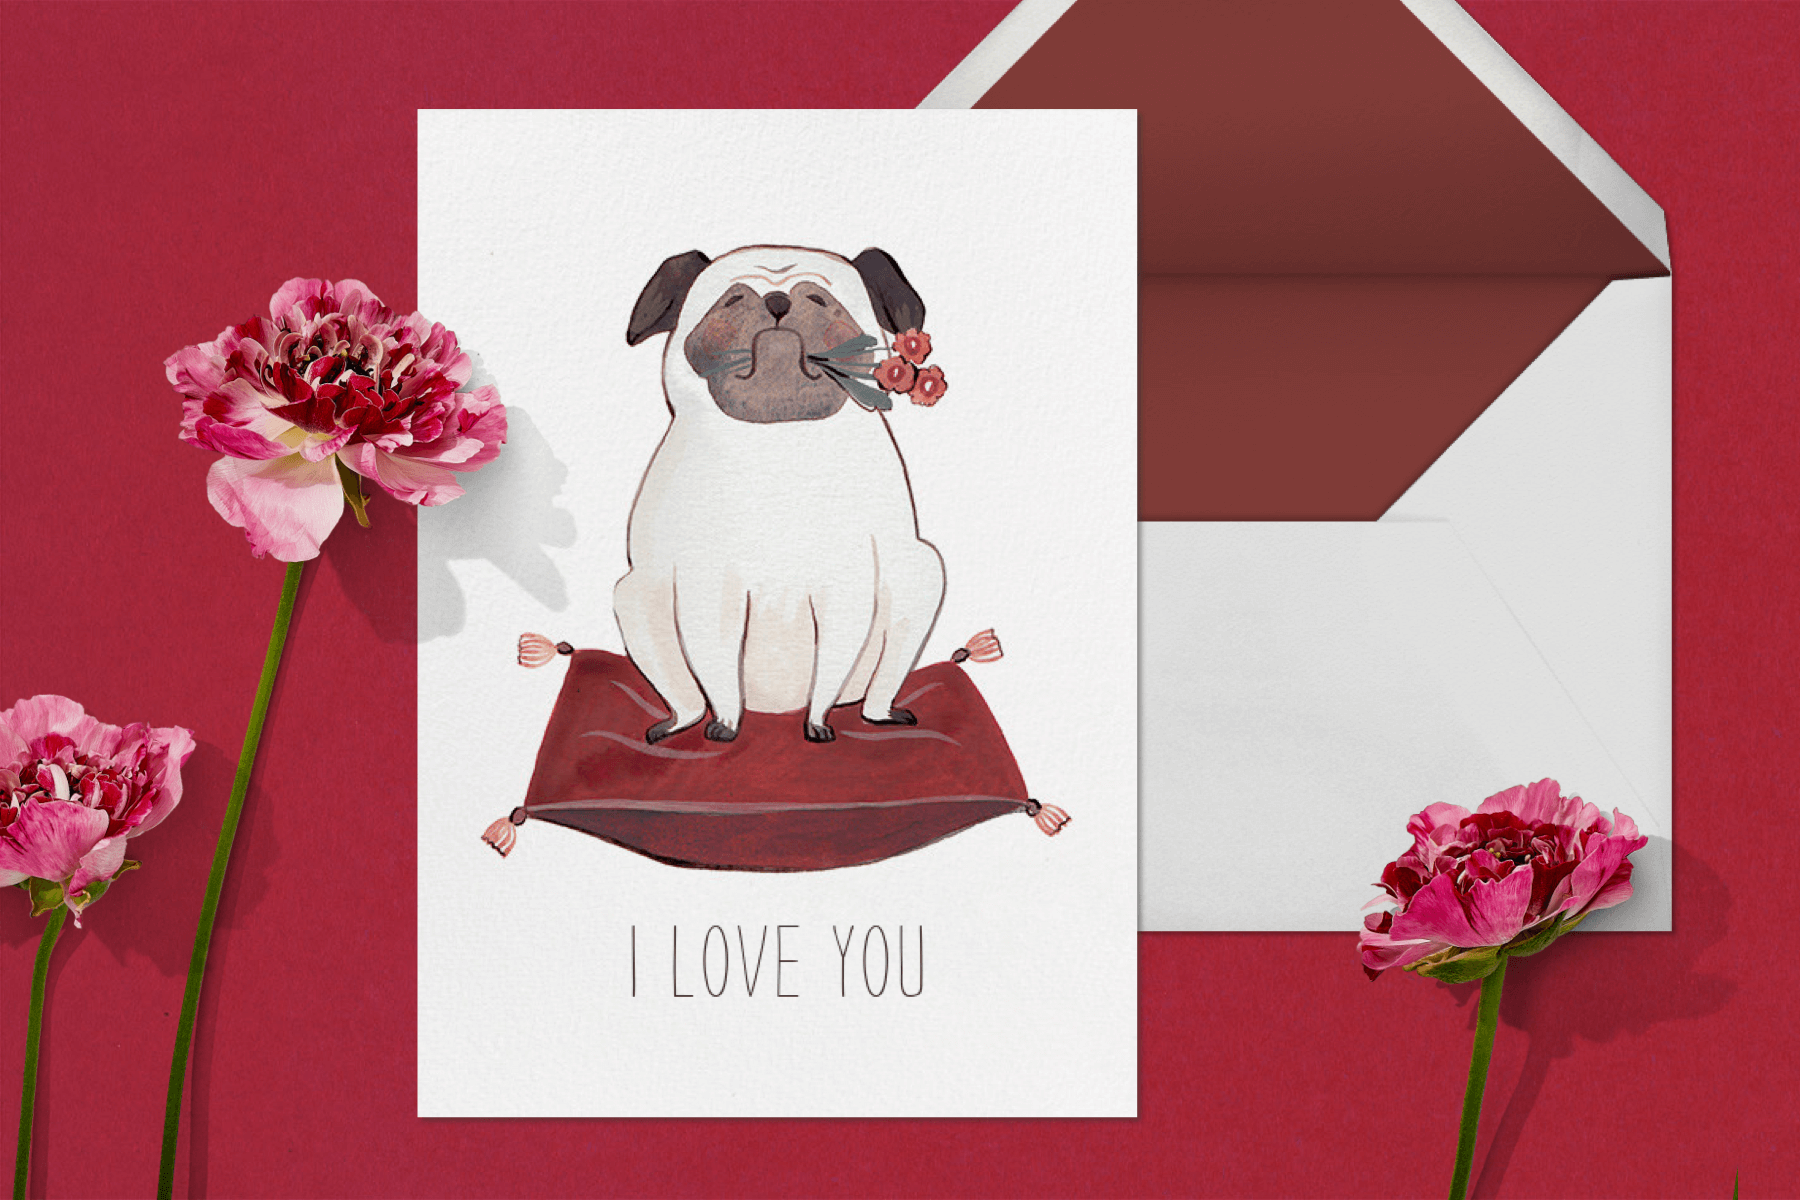 A Valentine’s Day card featuring a pug on a pillow.